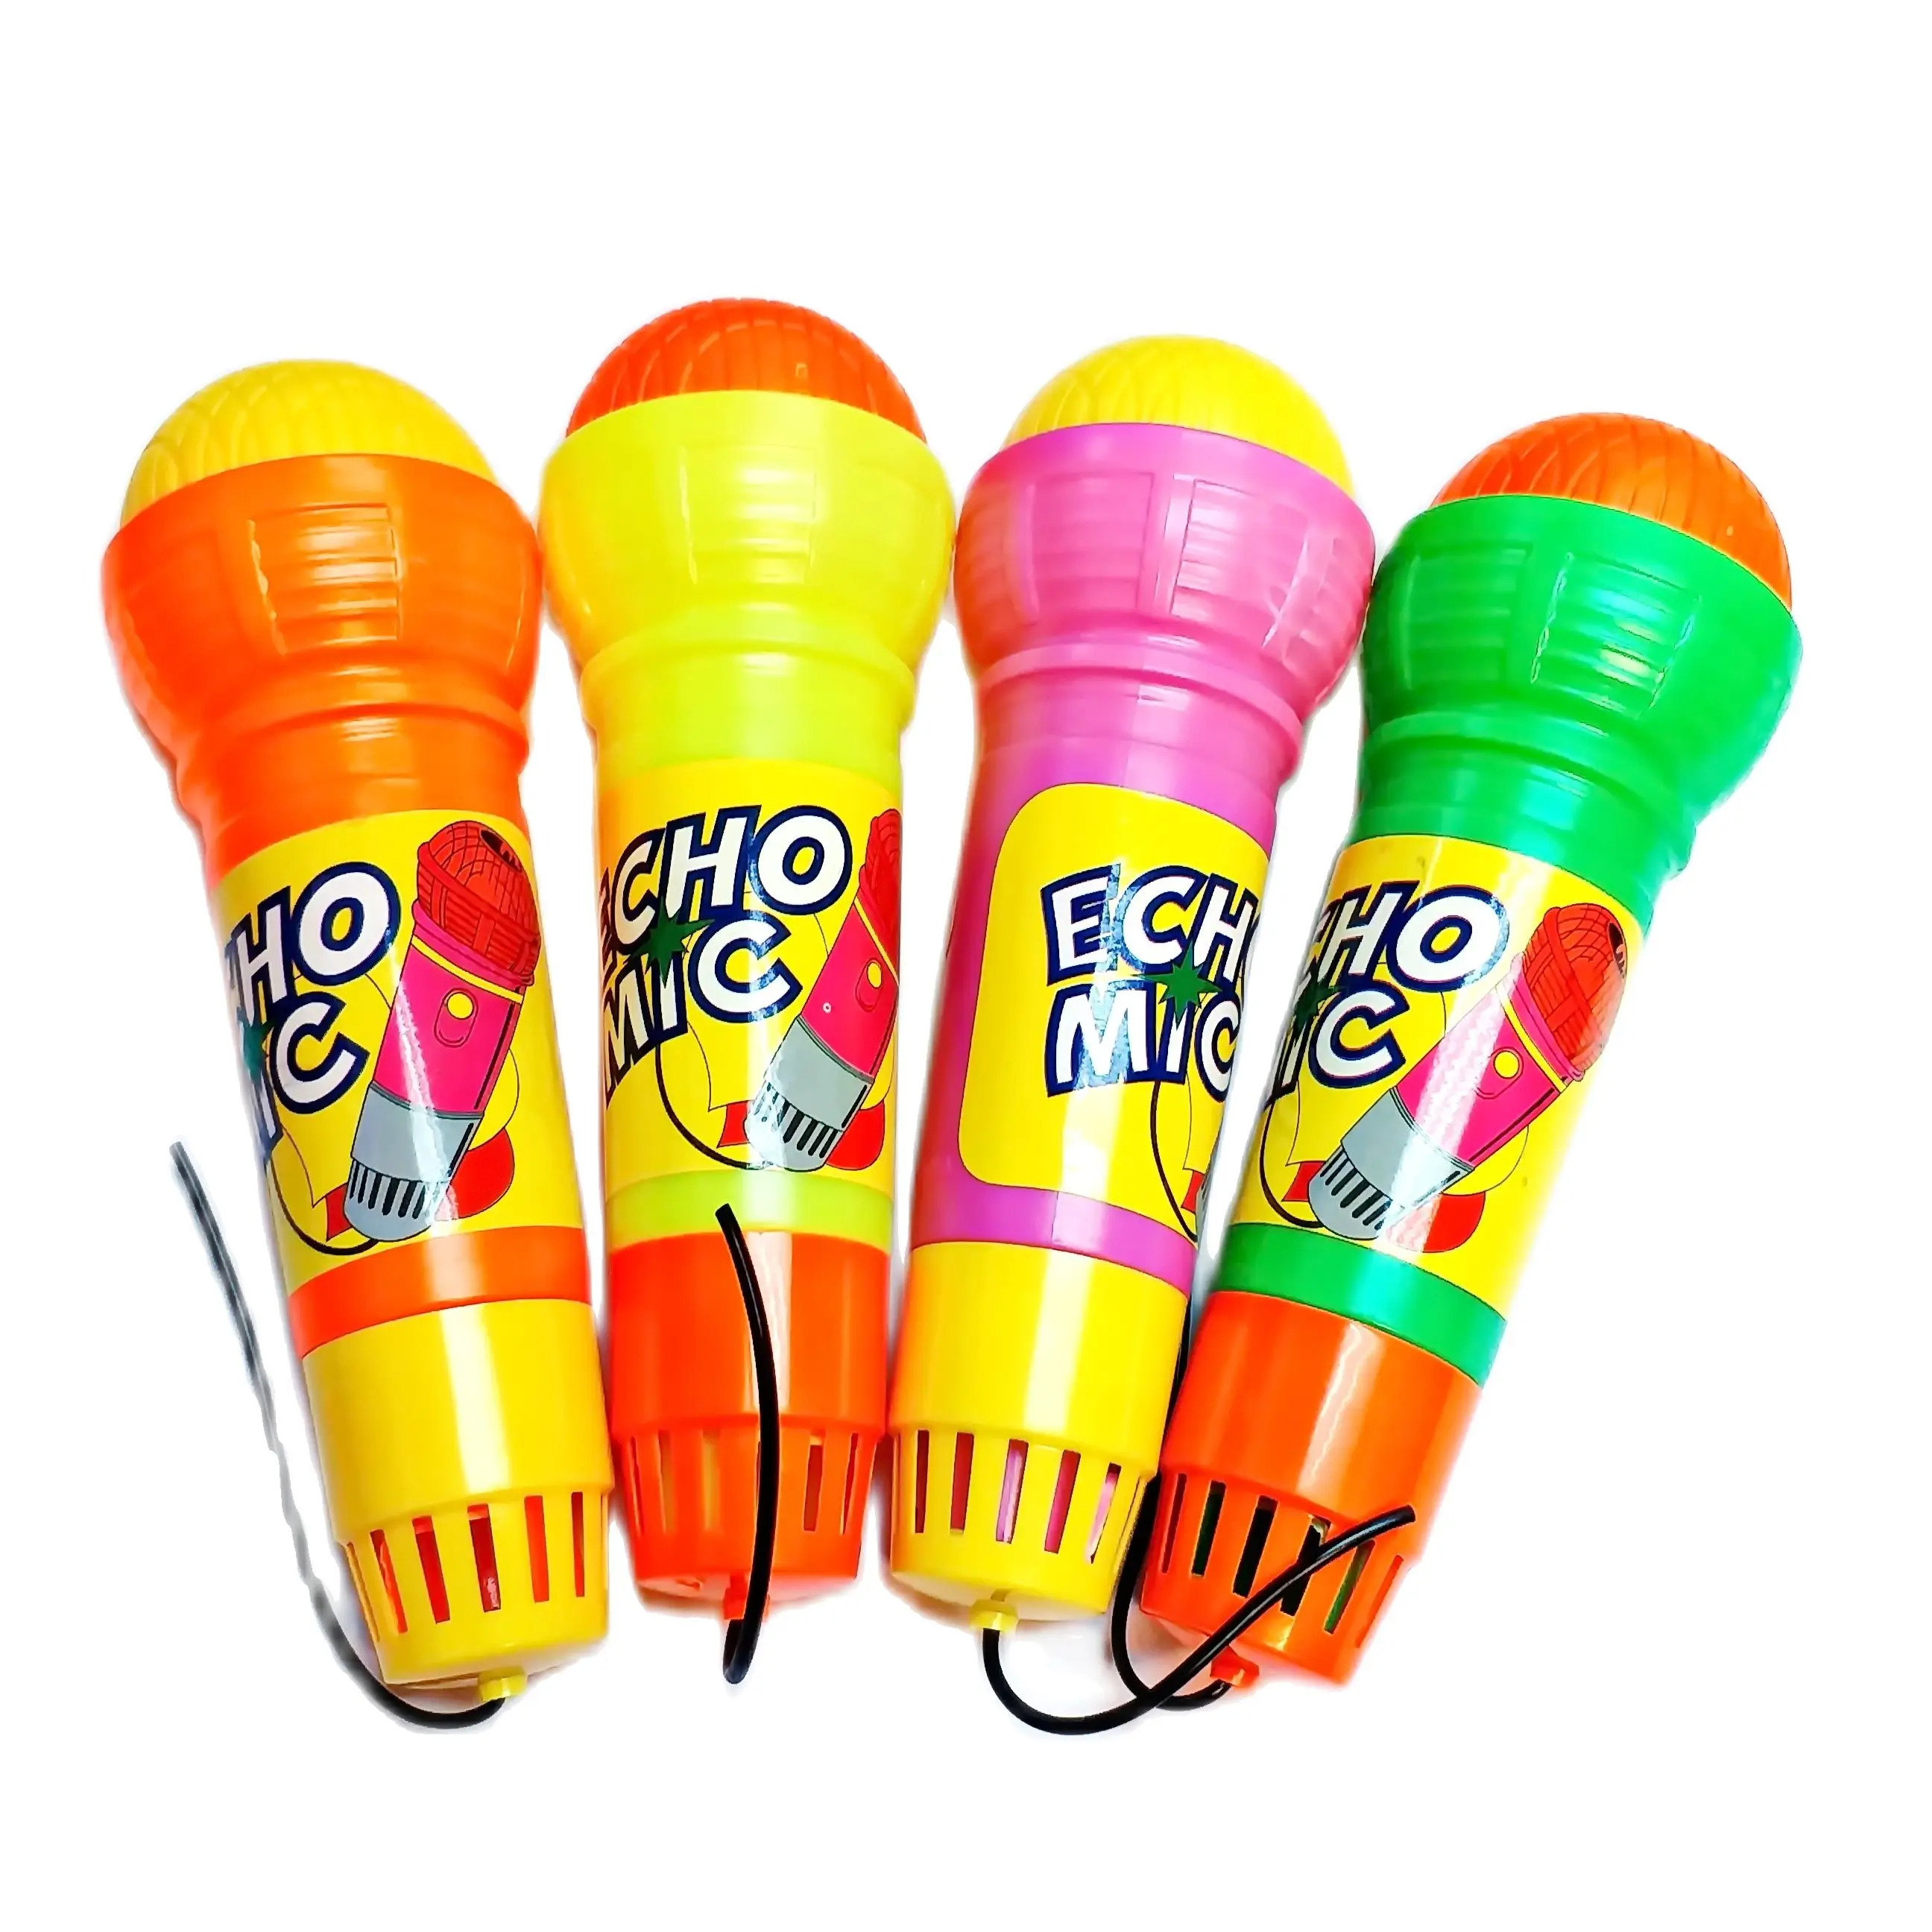 Plastic Magic Mic Novelty Echo Microphone Pretend Play Halloween Christmas Toy Gift for Children Random Color 